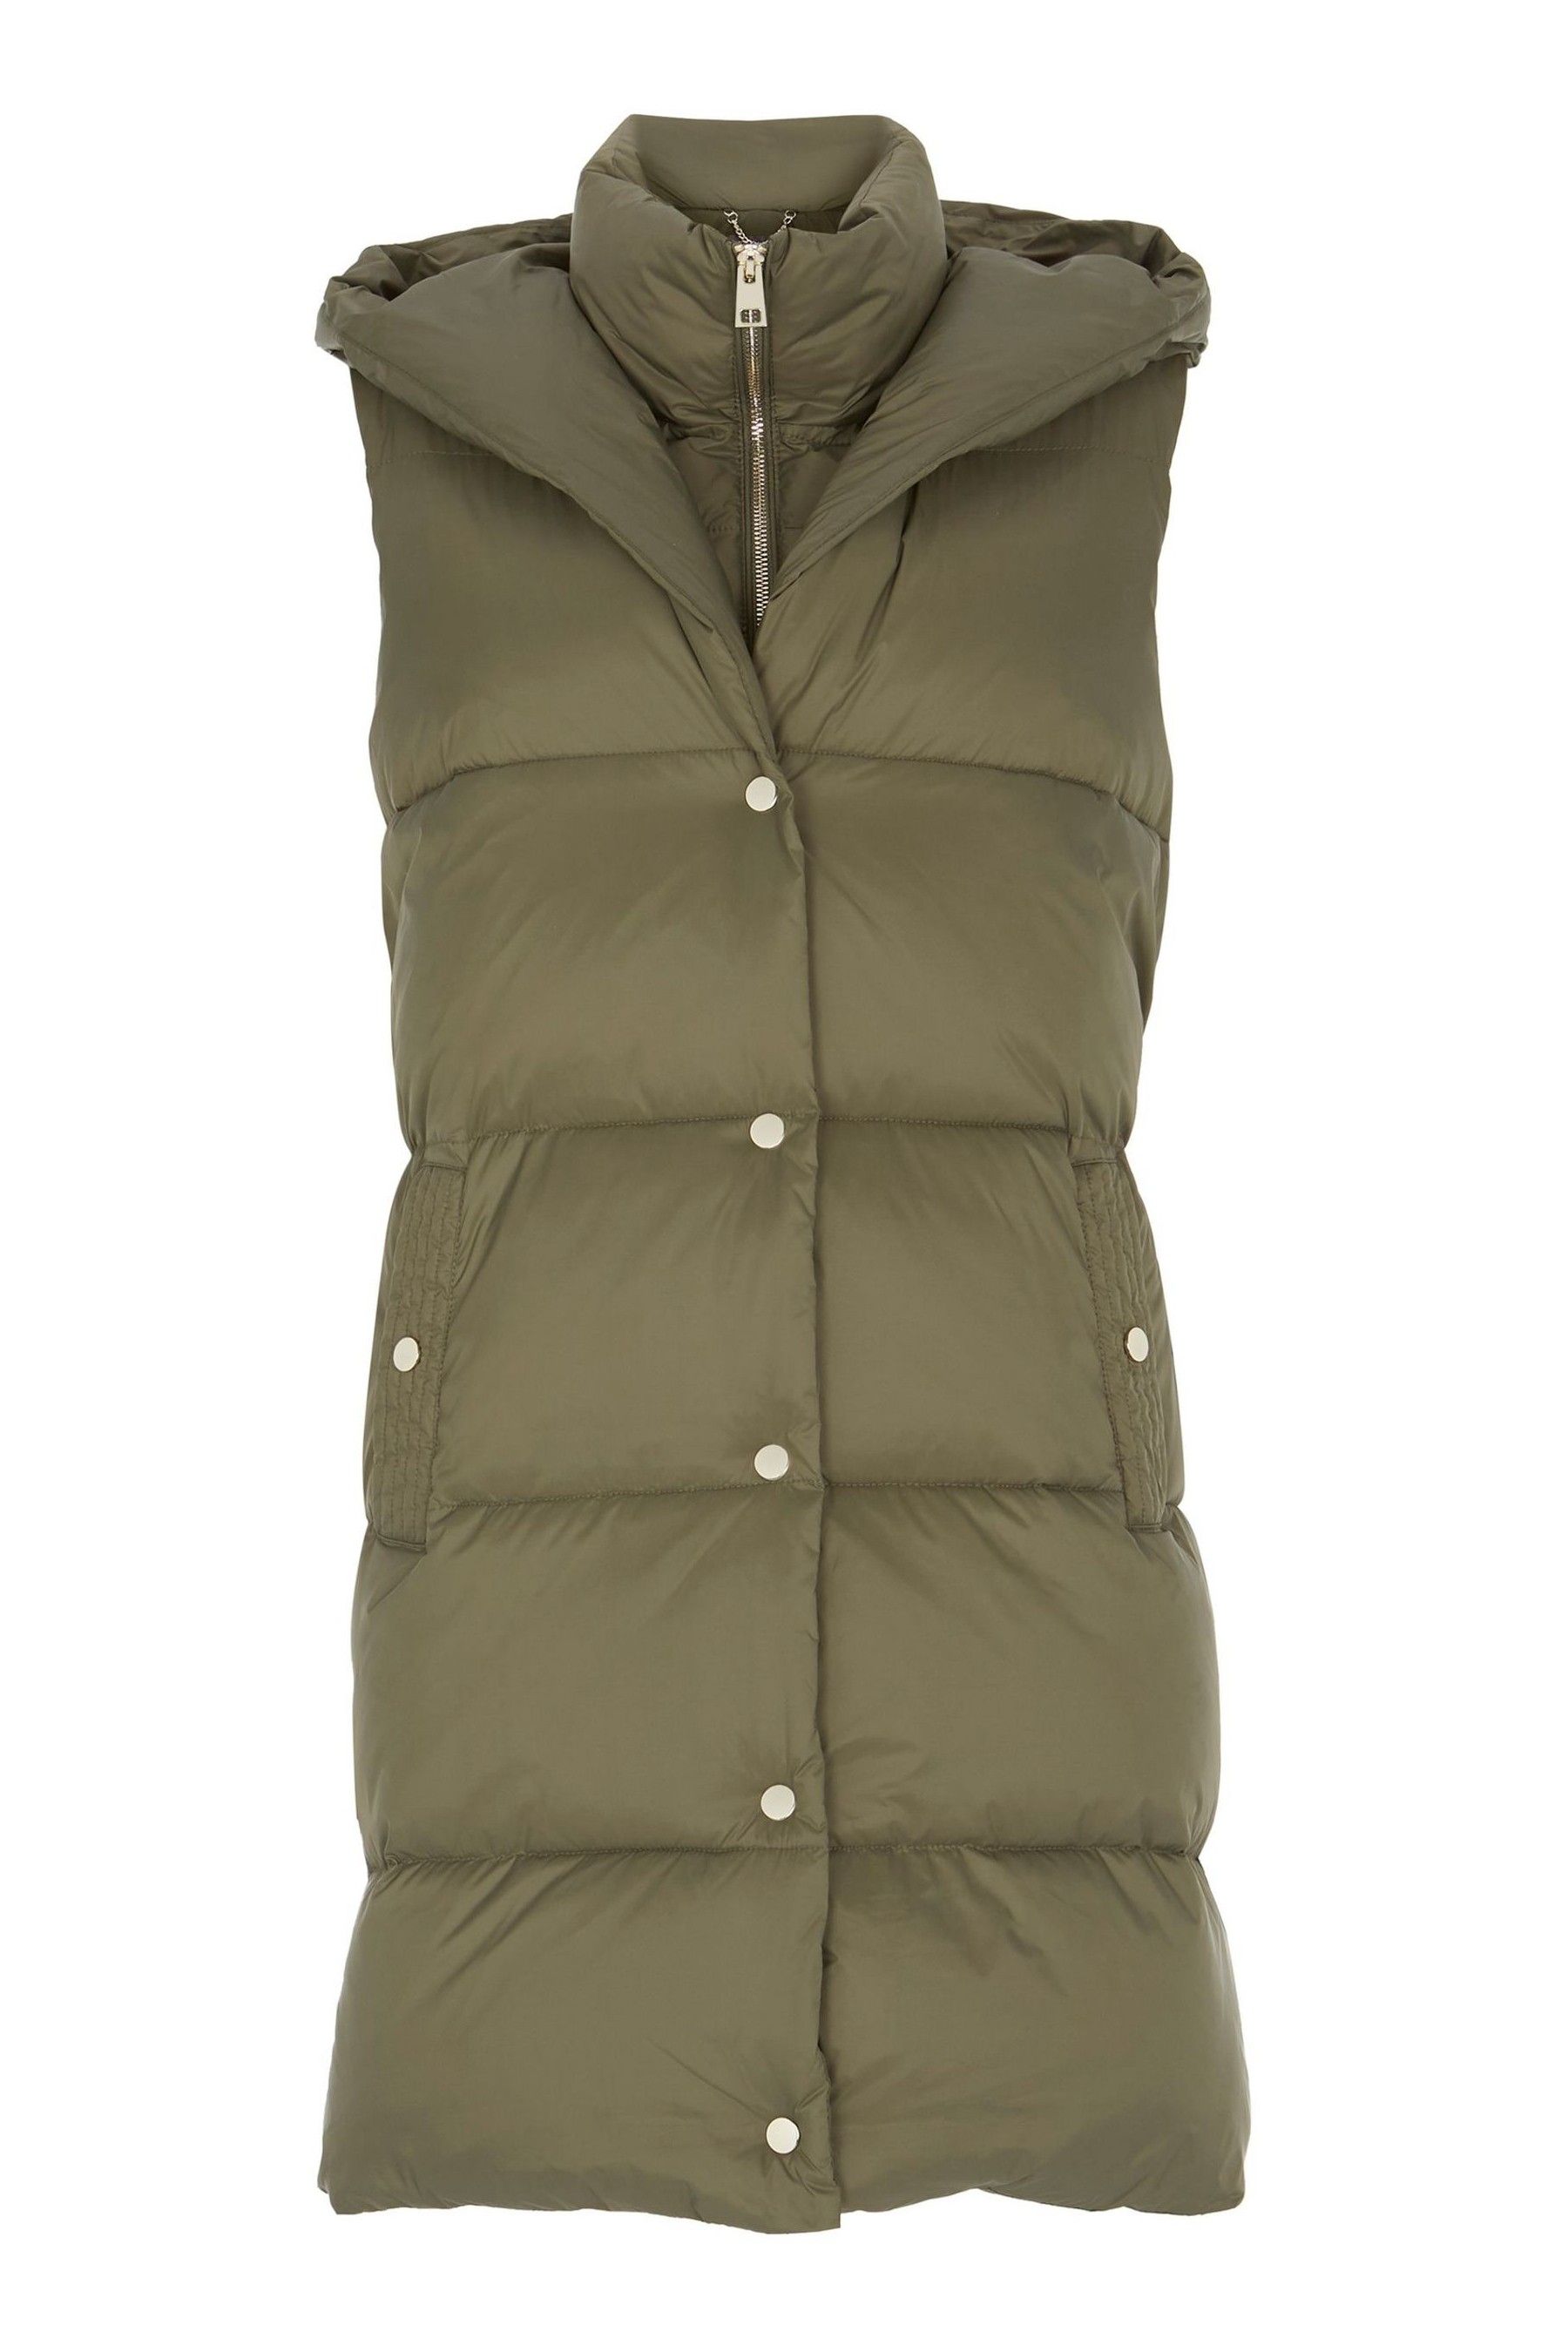 Buy Mint Velvet Layered Quilted Gilet from Next Ireland